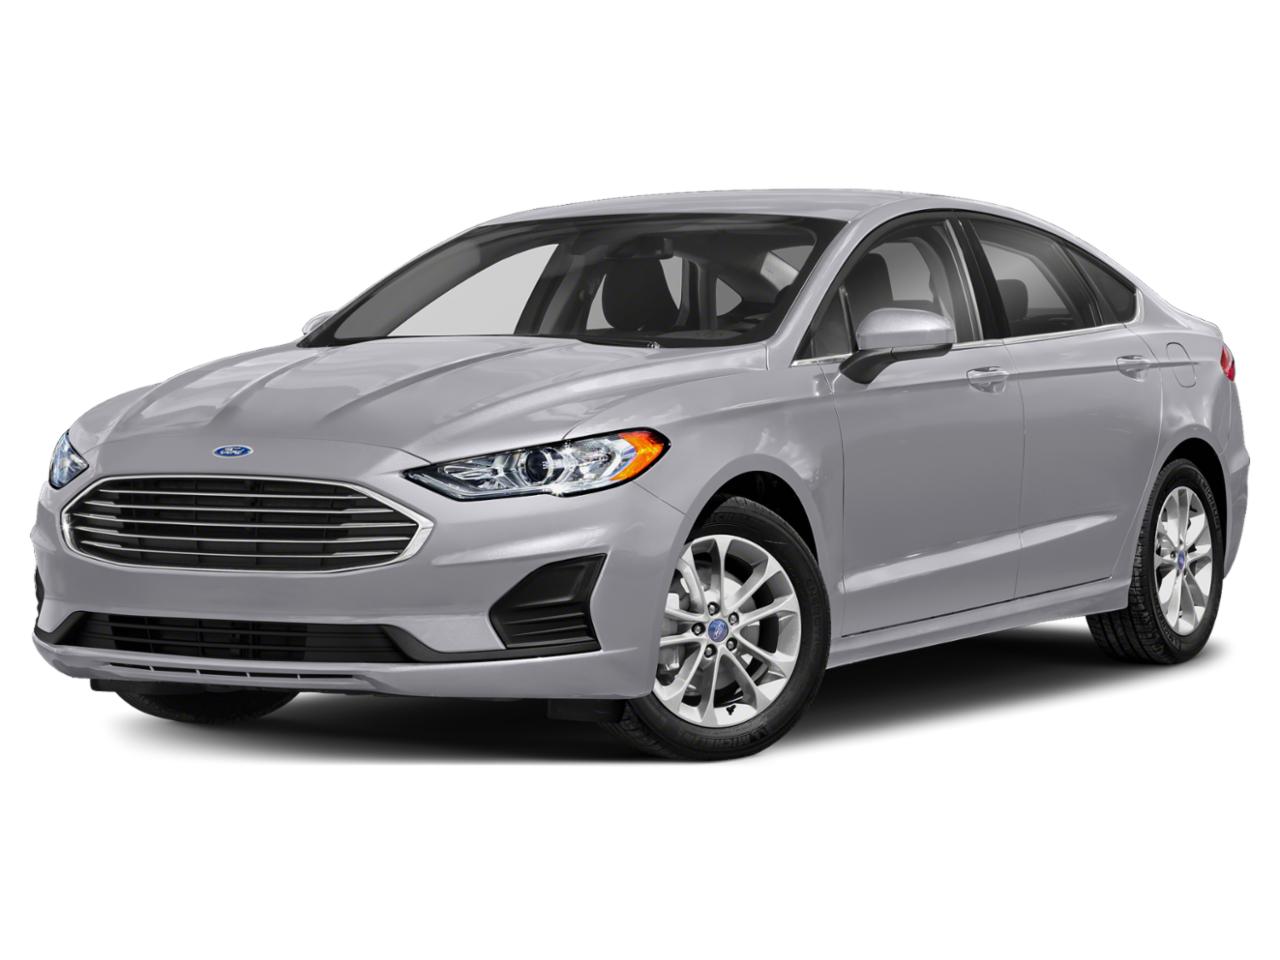 Brenham Silver 2020 Ford Fusion: Certified Car for Sale - 55414R